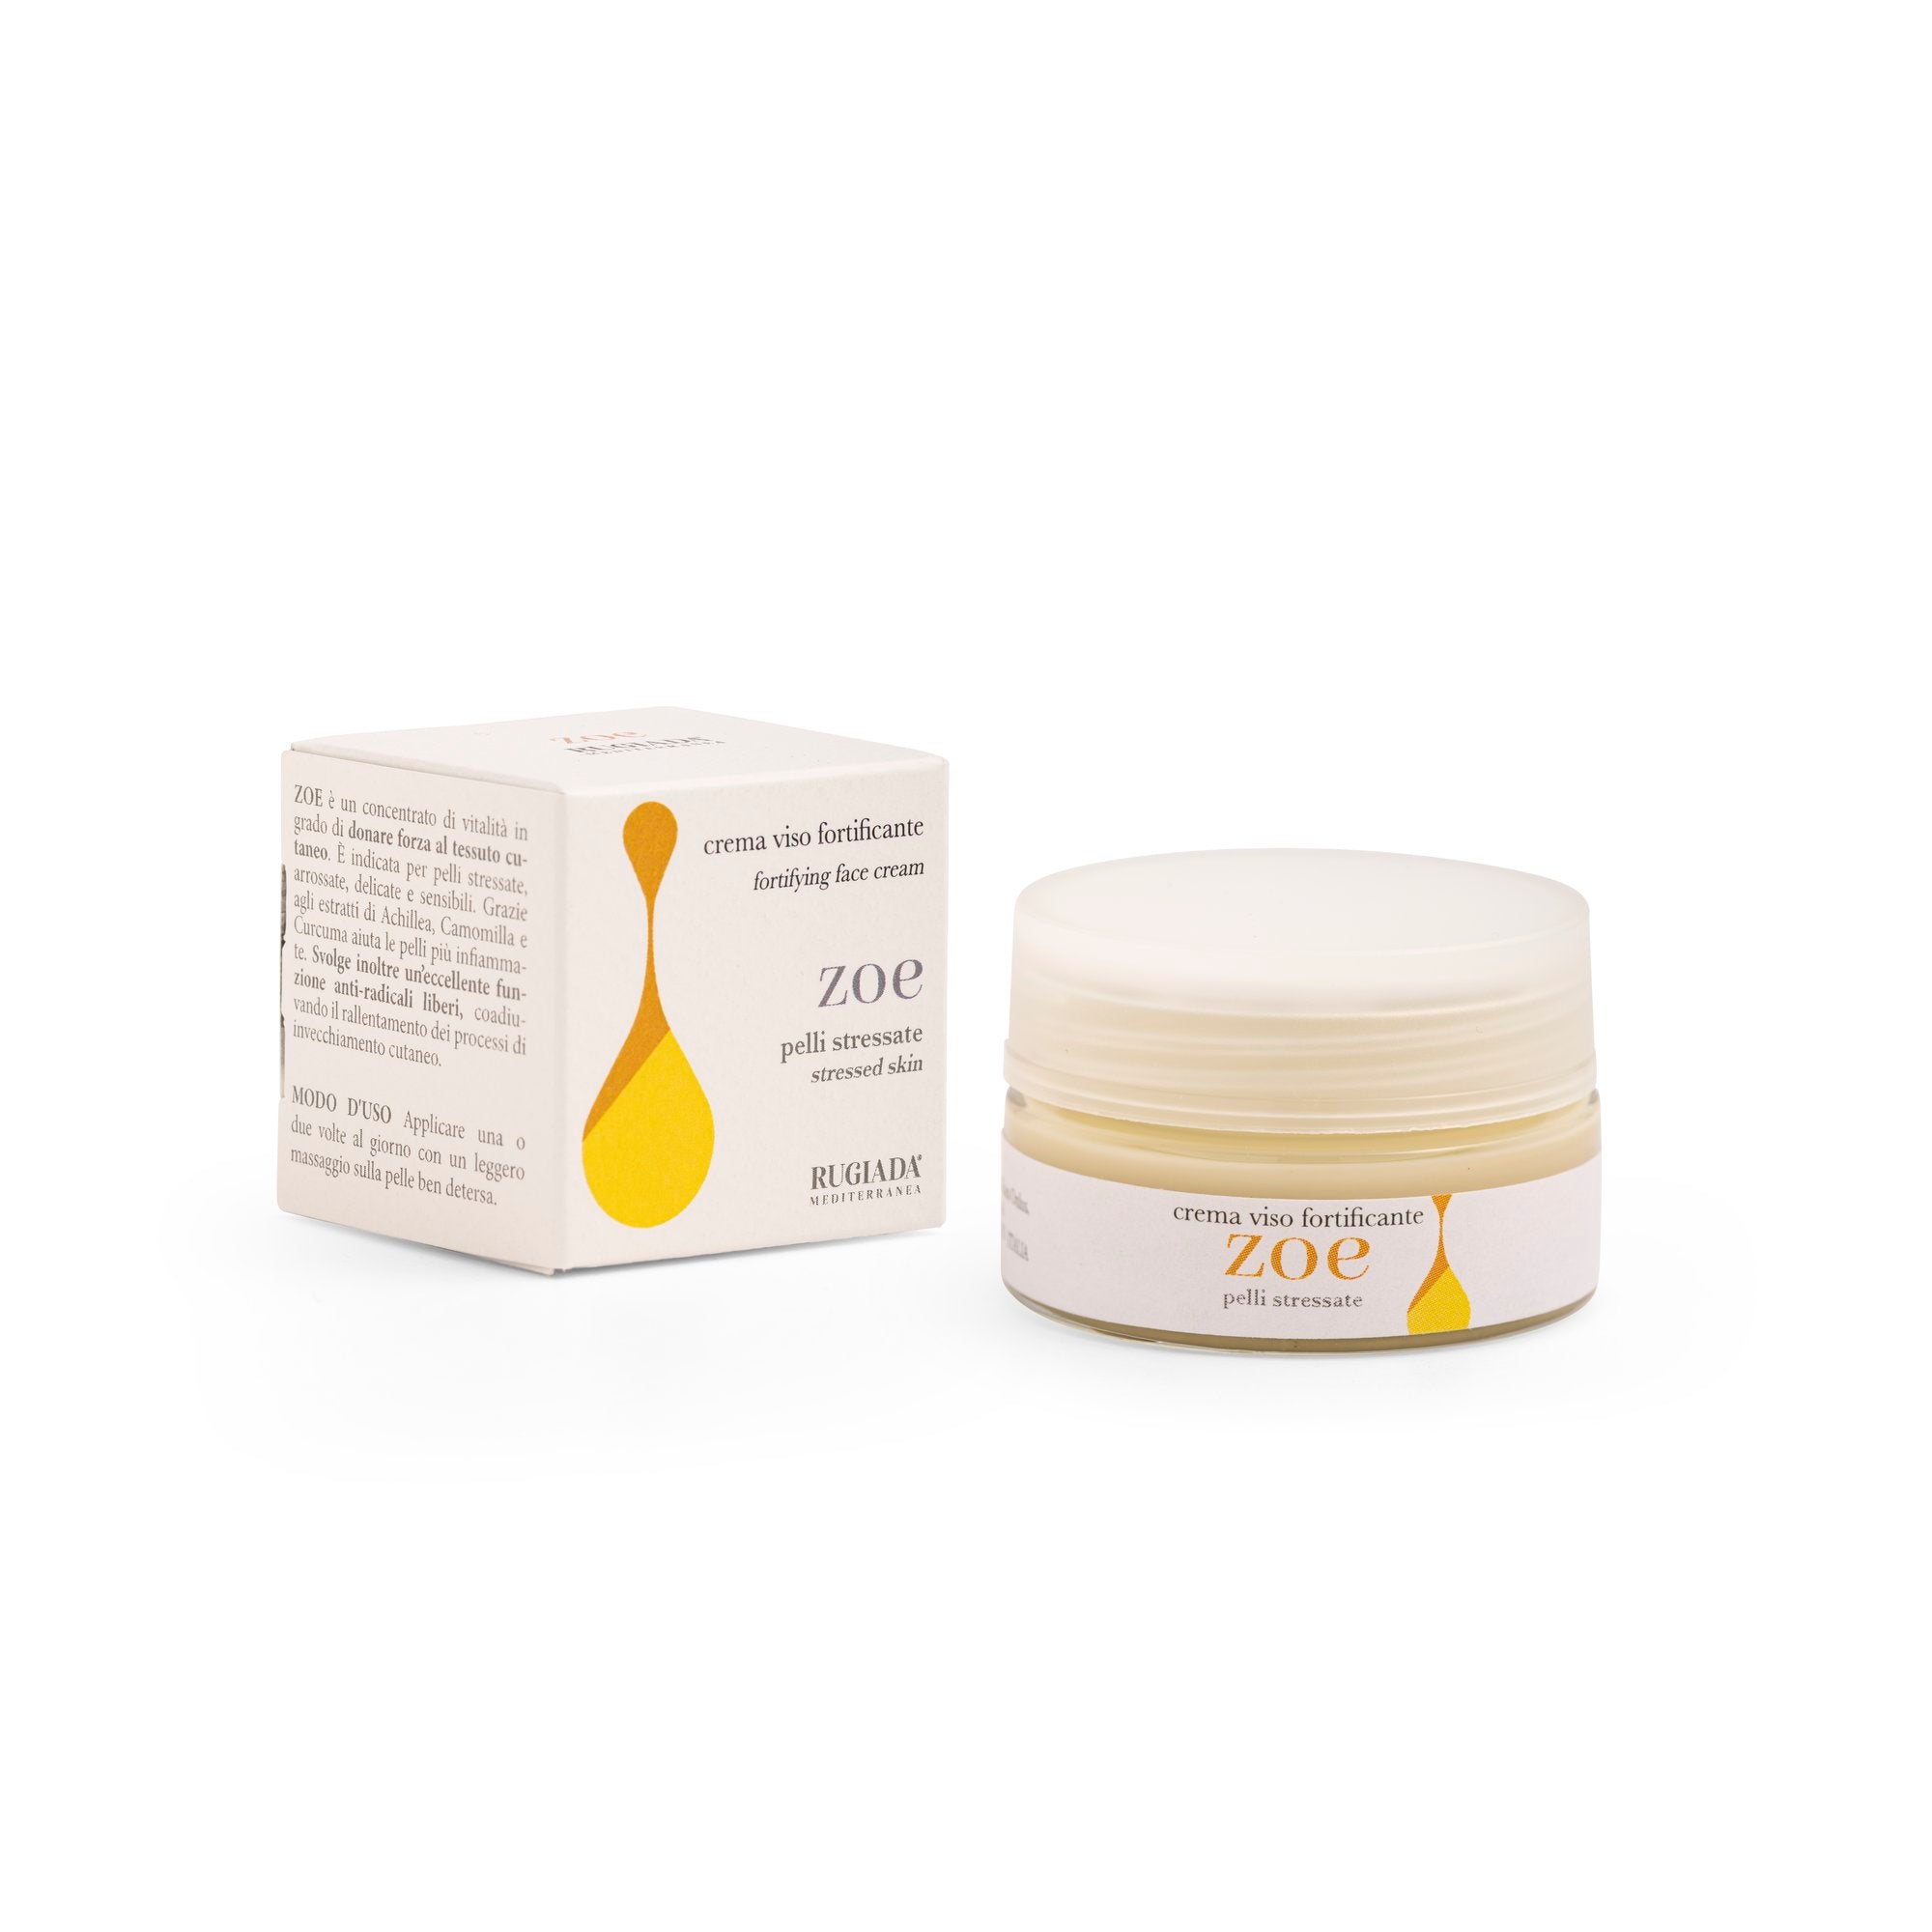 Zoe face cream 15 ml - Prevents skin spots and strengthens stressed skin